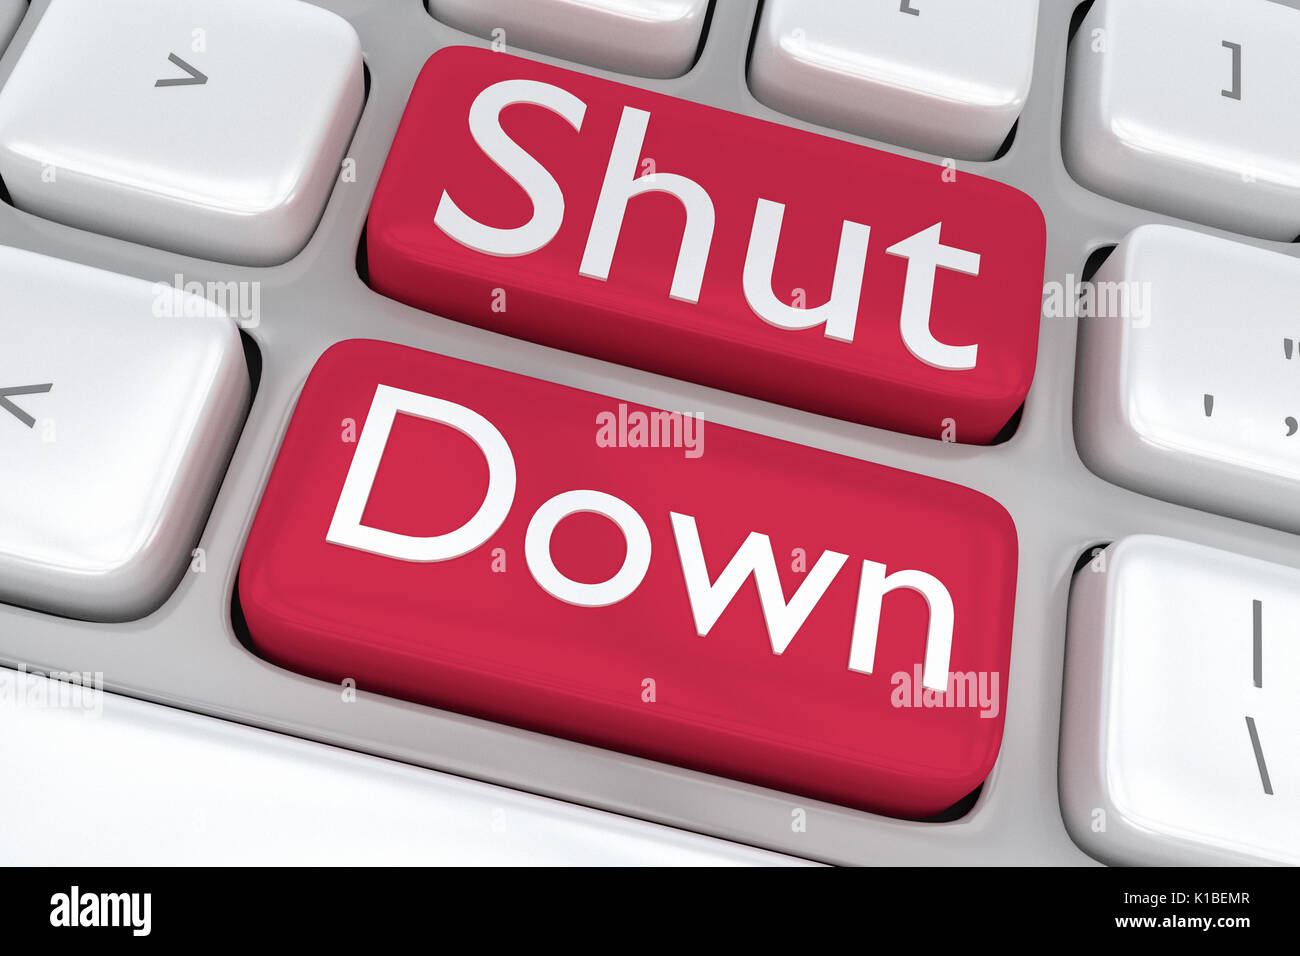 Render illustration of computer keyboard with the print Shut Down on two adjacent red buttons Stock Photo